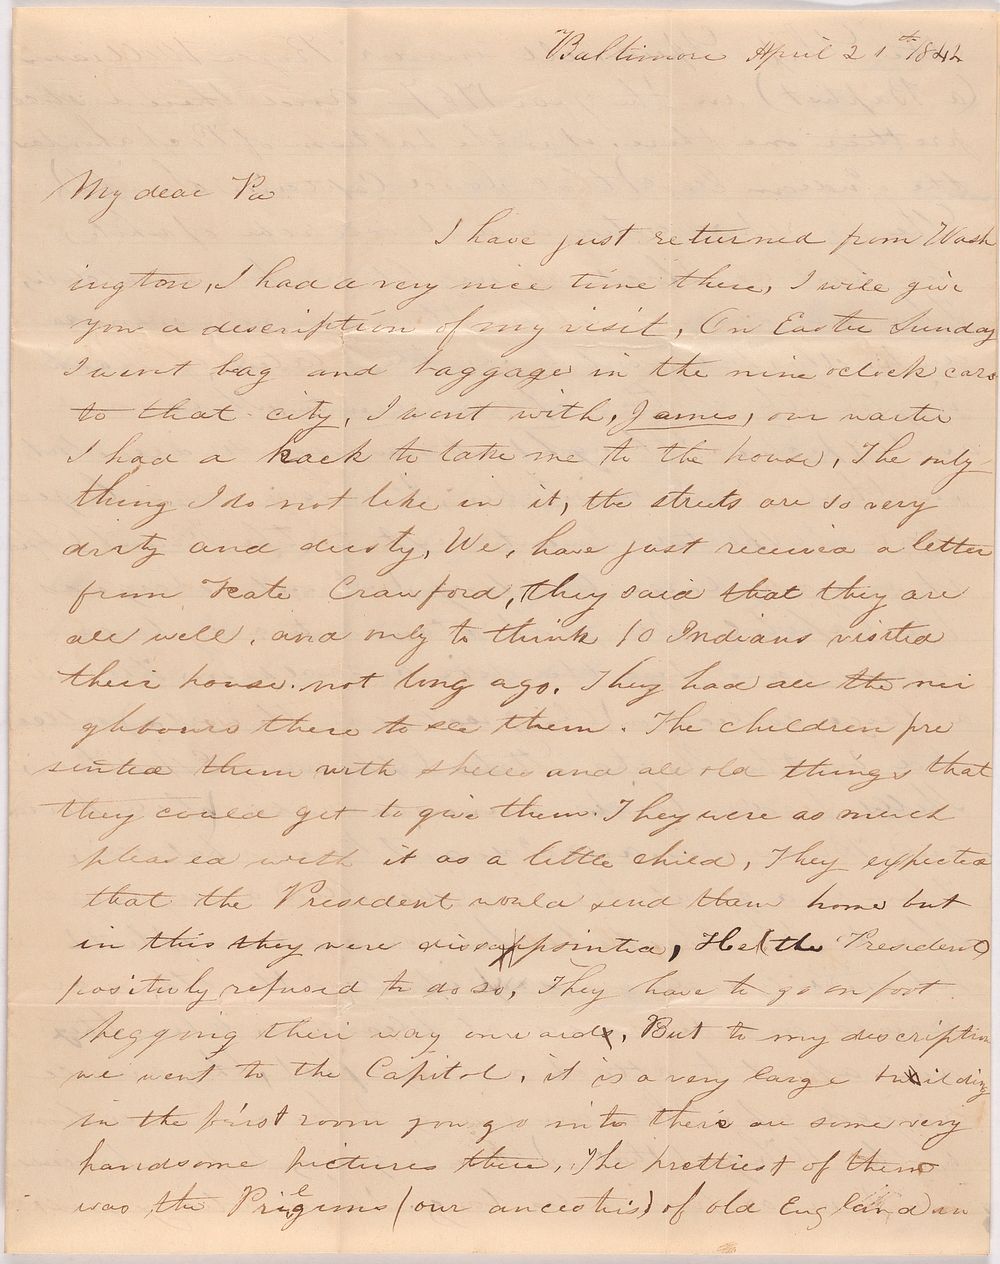 Letter from Mary Shoemaker to her father, F. Shoemaker